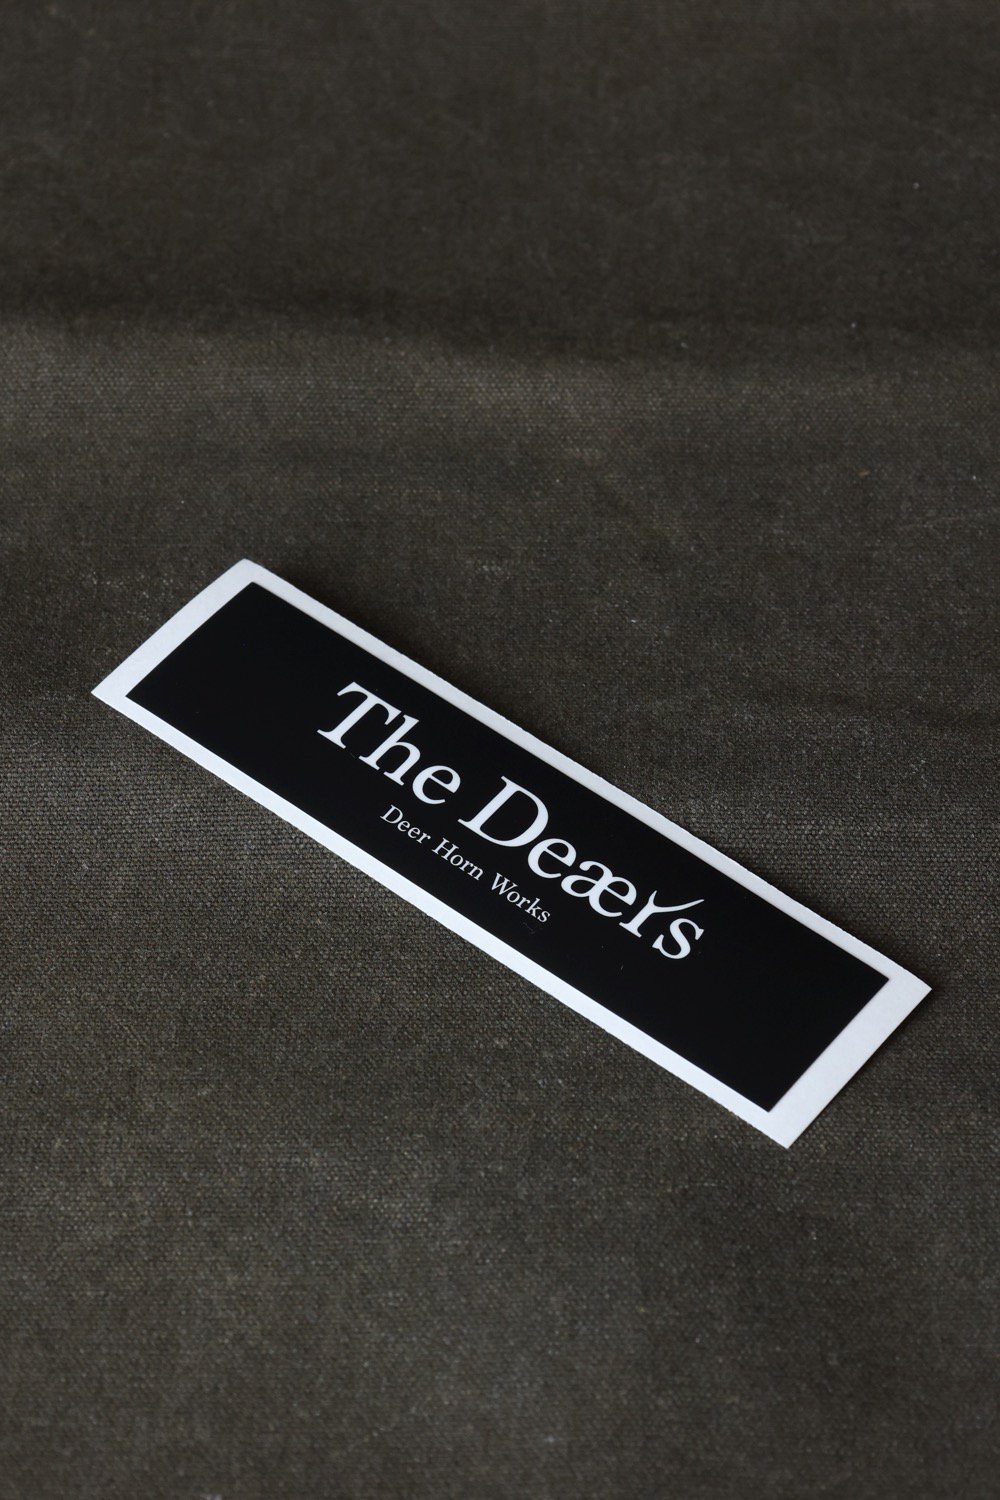 The Deaers sticker